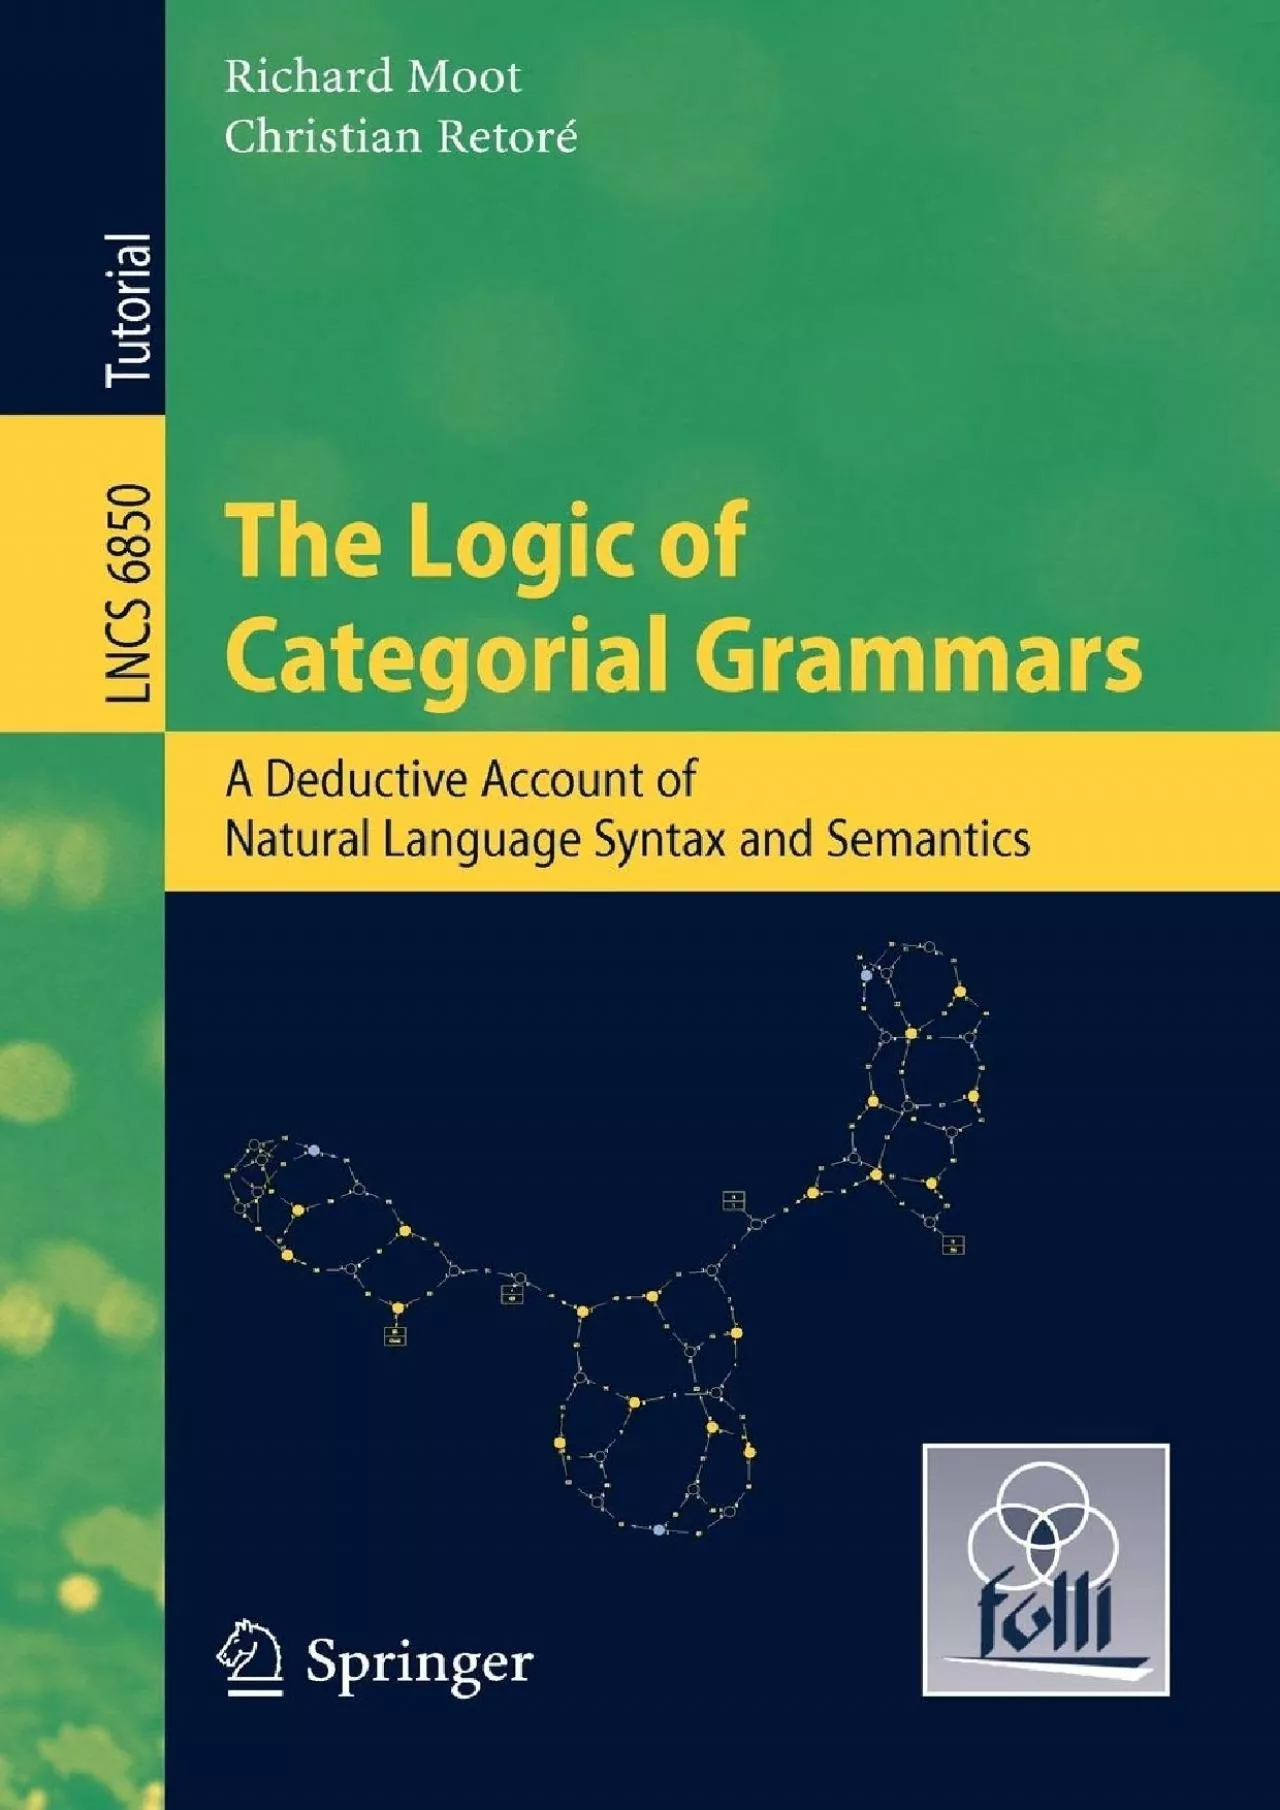 [DOWLOAD]-The Logic of Categorial Grammars: A deductive account of natural language syntax